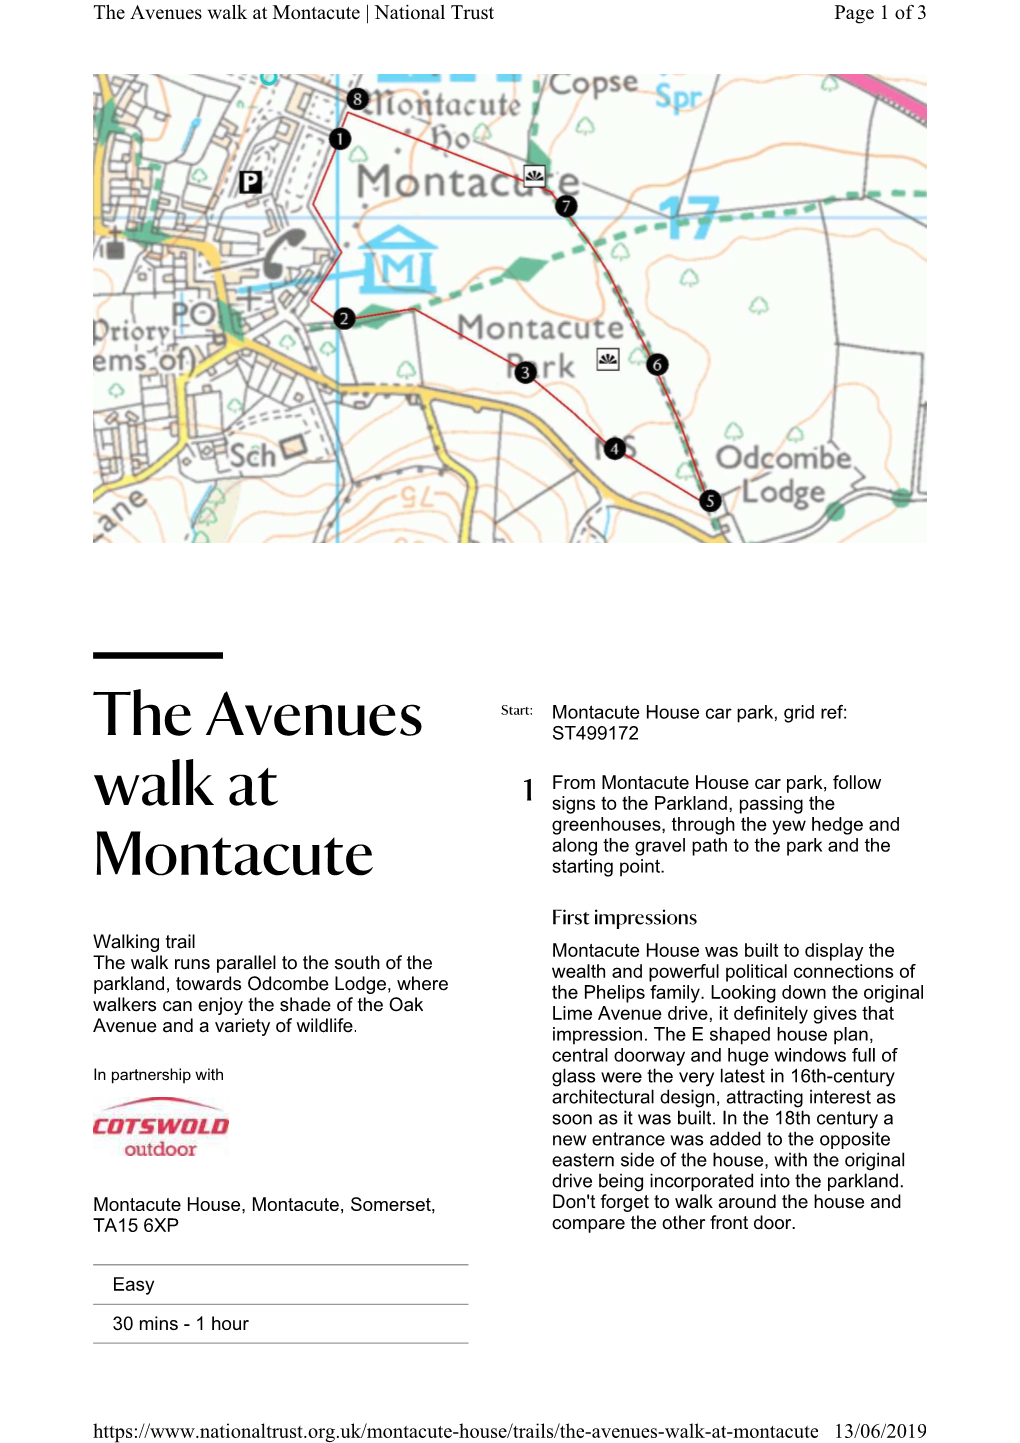 The Avenues Walk at Montacute | National Trust Page 1 of 3